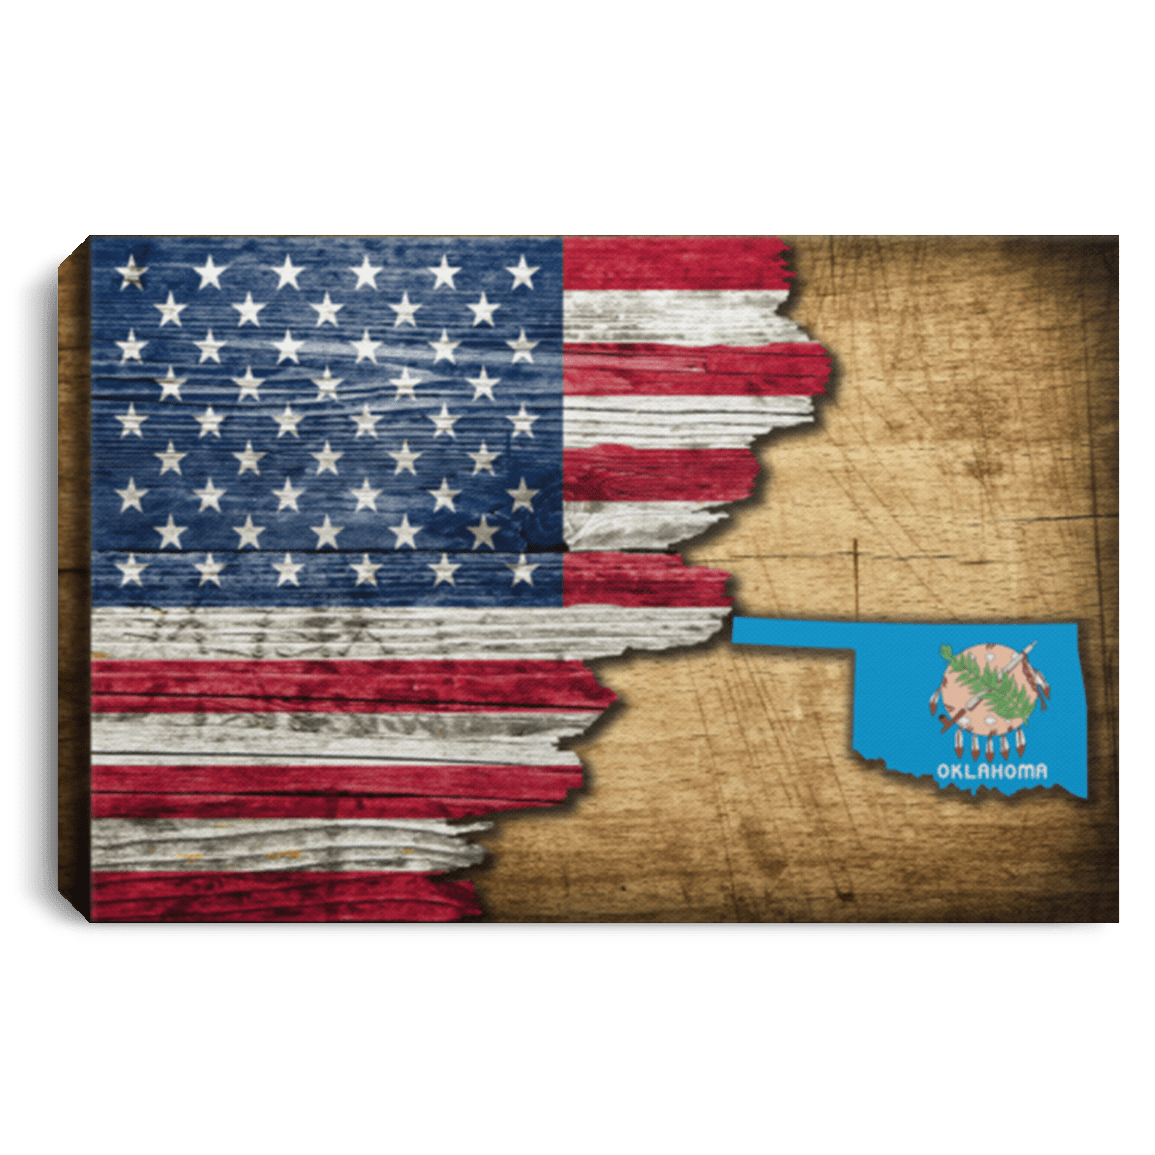 United States/Oklahoma Flag Ripped Effect 12X8 Inches Landscape Canvas .75In Frame